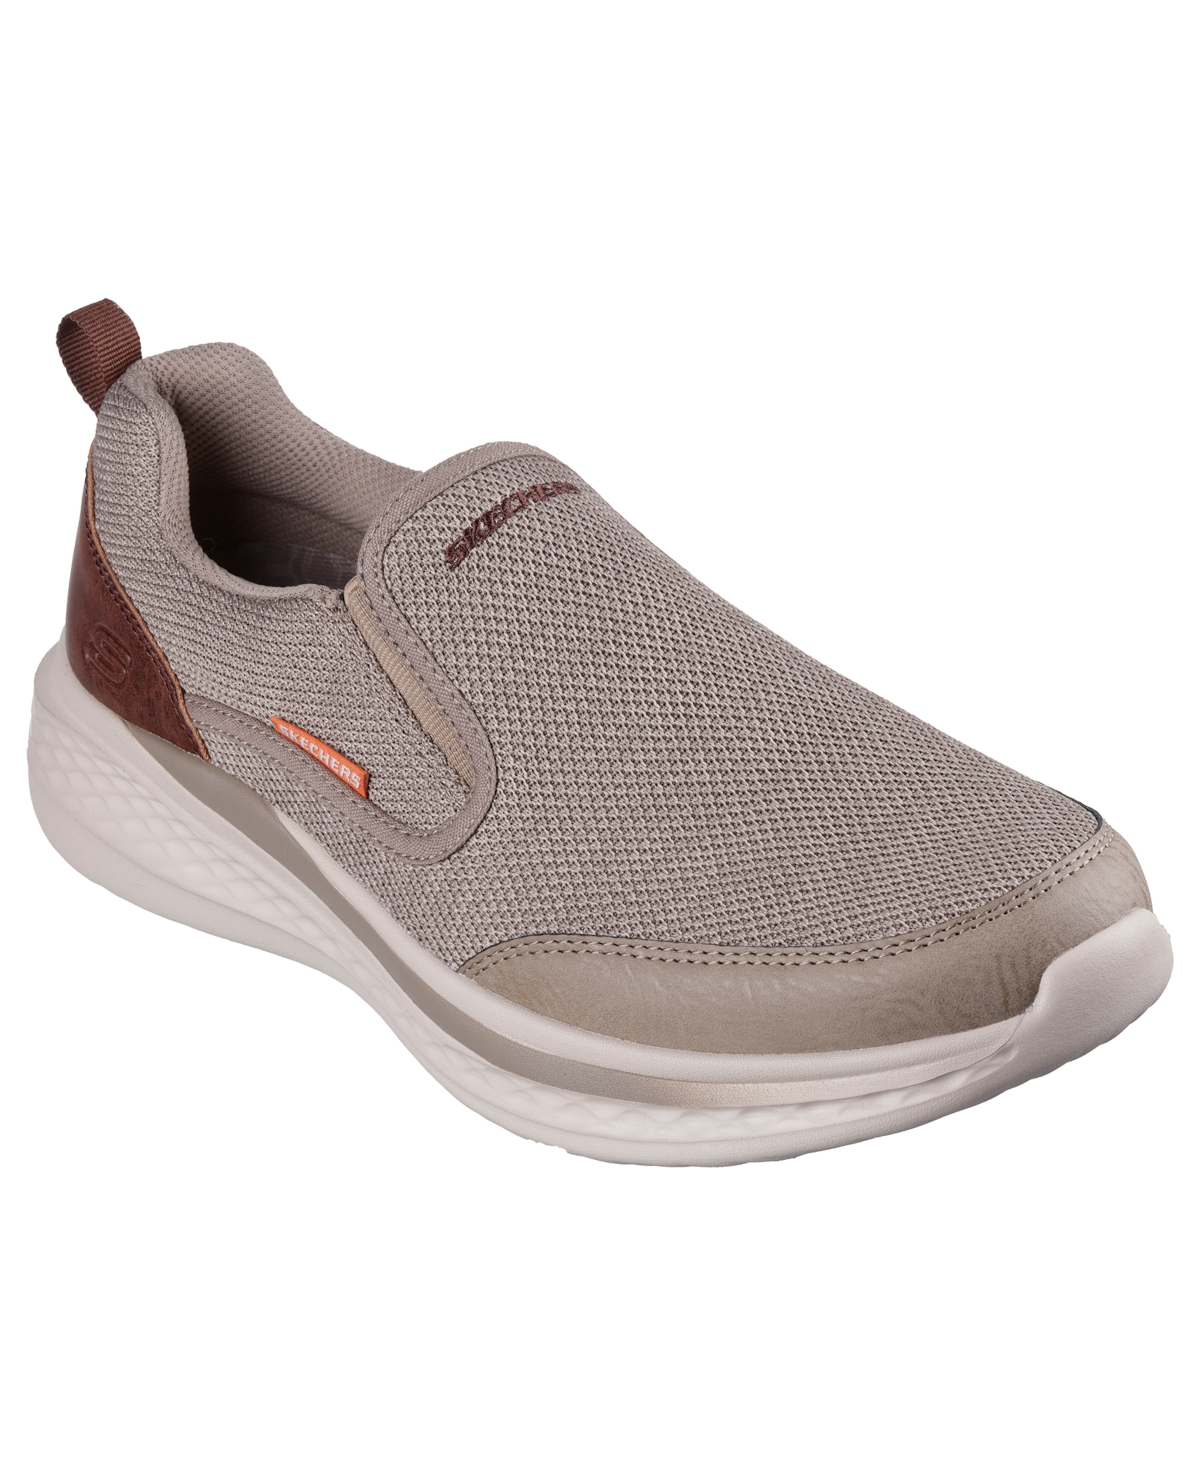 Men's Casual Sneakers from Finish Line - Khaki